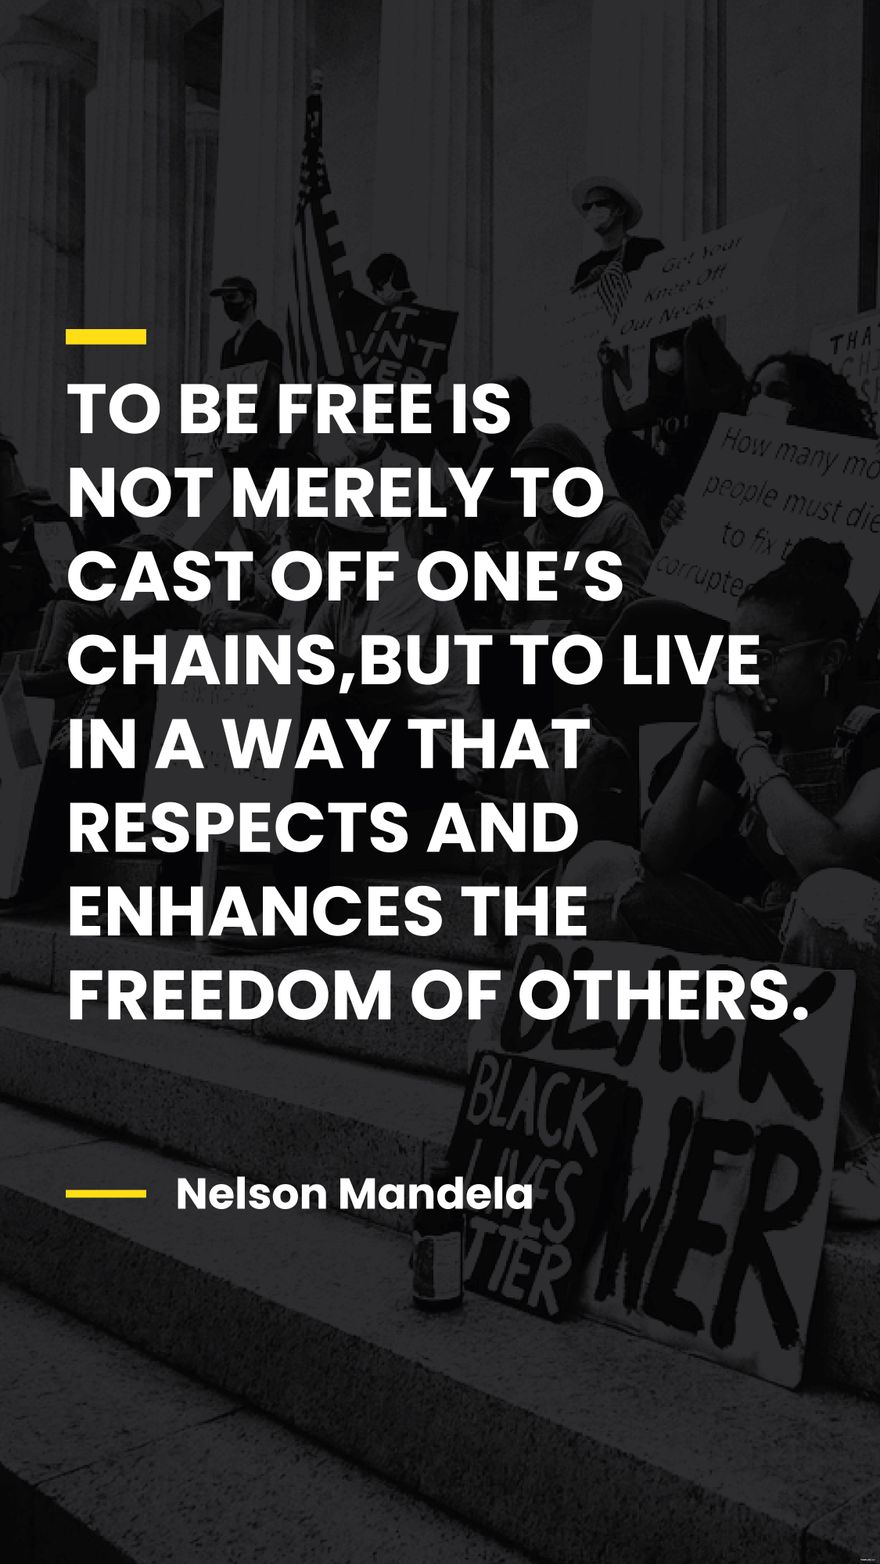 Nelson Mandela - To be is not merely to cast off one’s chains, but to live in a way that respects and enhances the freedom of others.